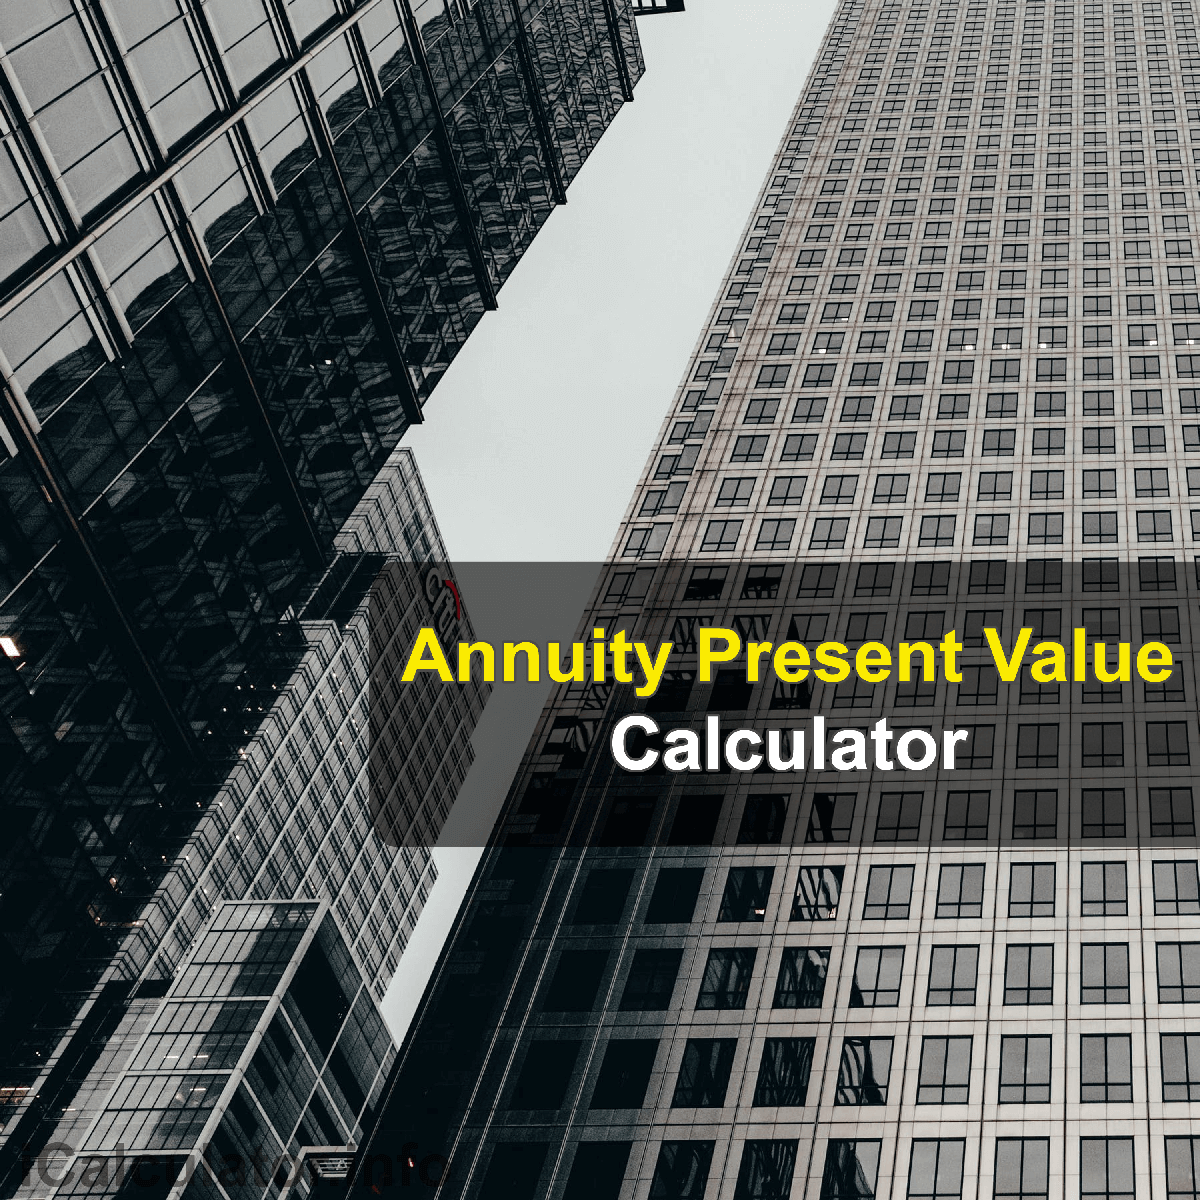 Present Value of Annuity Calculator. This image provides details of how to calculate the present value of an annuity using a calculator and notepad. By using the present value of an annuity formula, the Present Value of Annuity Calculator Calculator provides a true calculation of the current value of future payments that could be received.